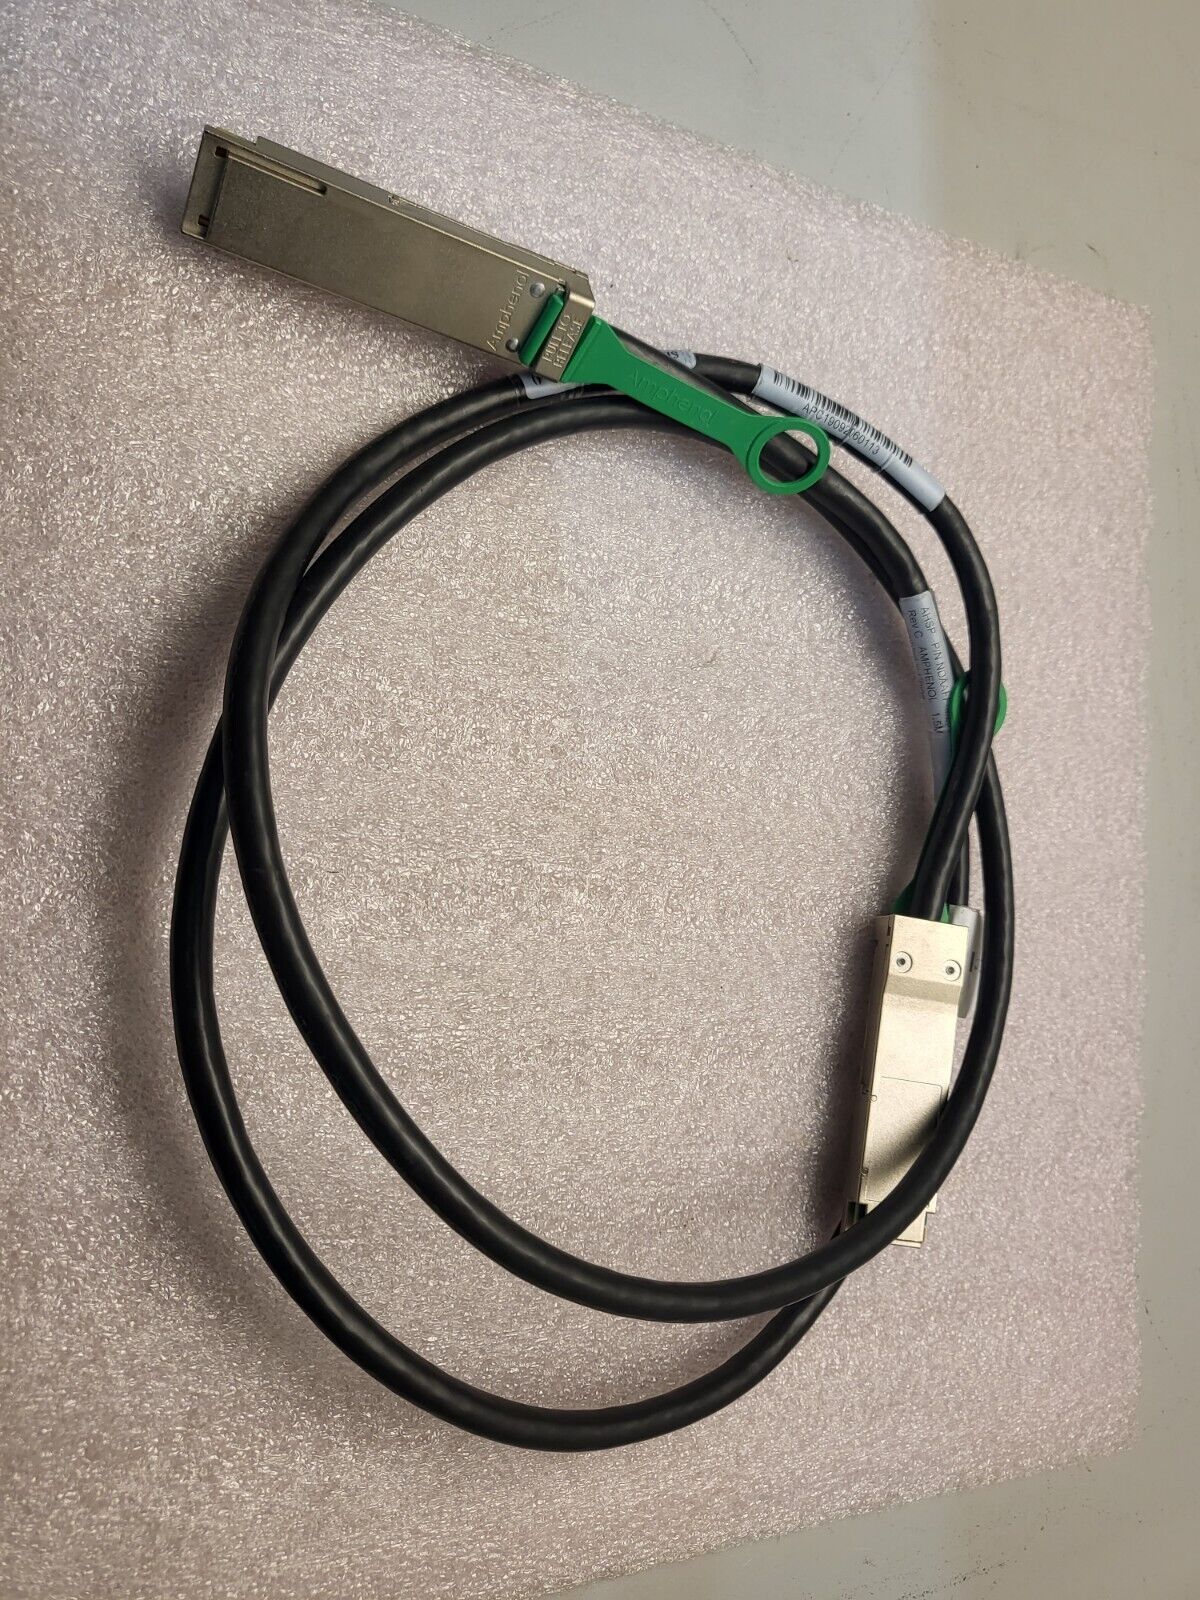 QSFP28 Cable NDAAFF Amphenol  100G/200G, High Speed Input Output Connectors